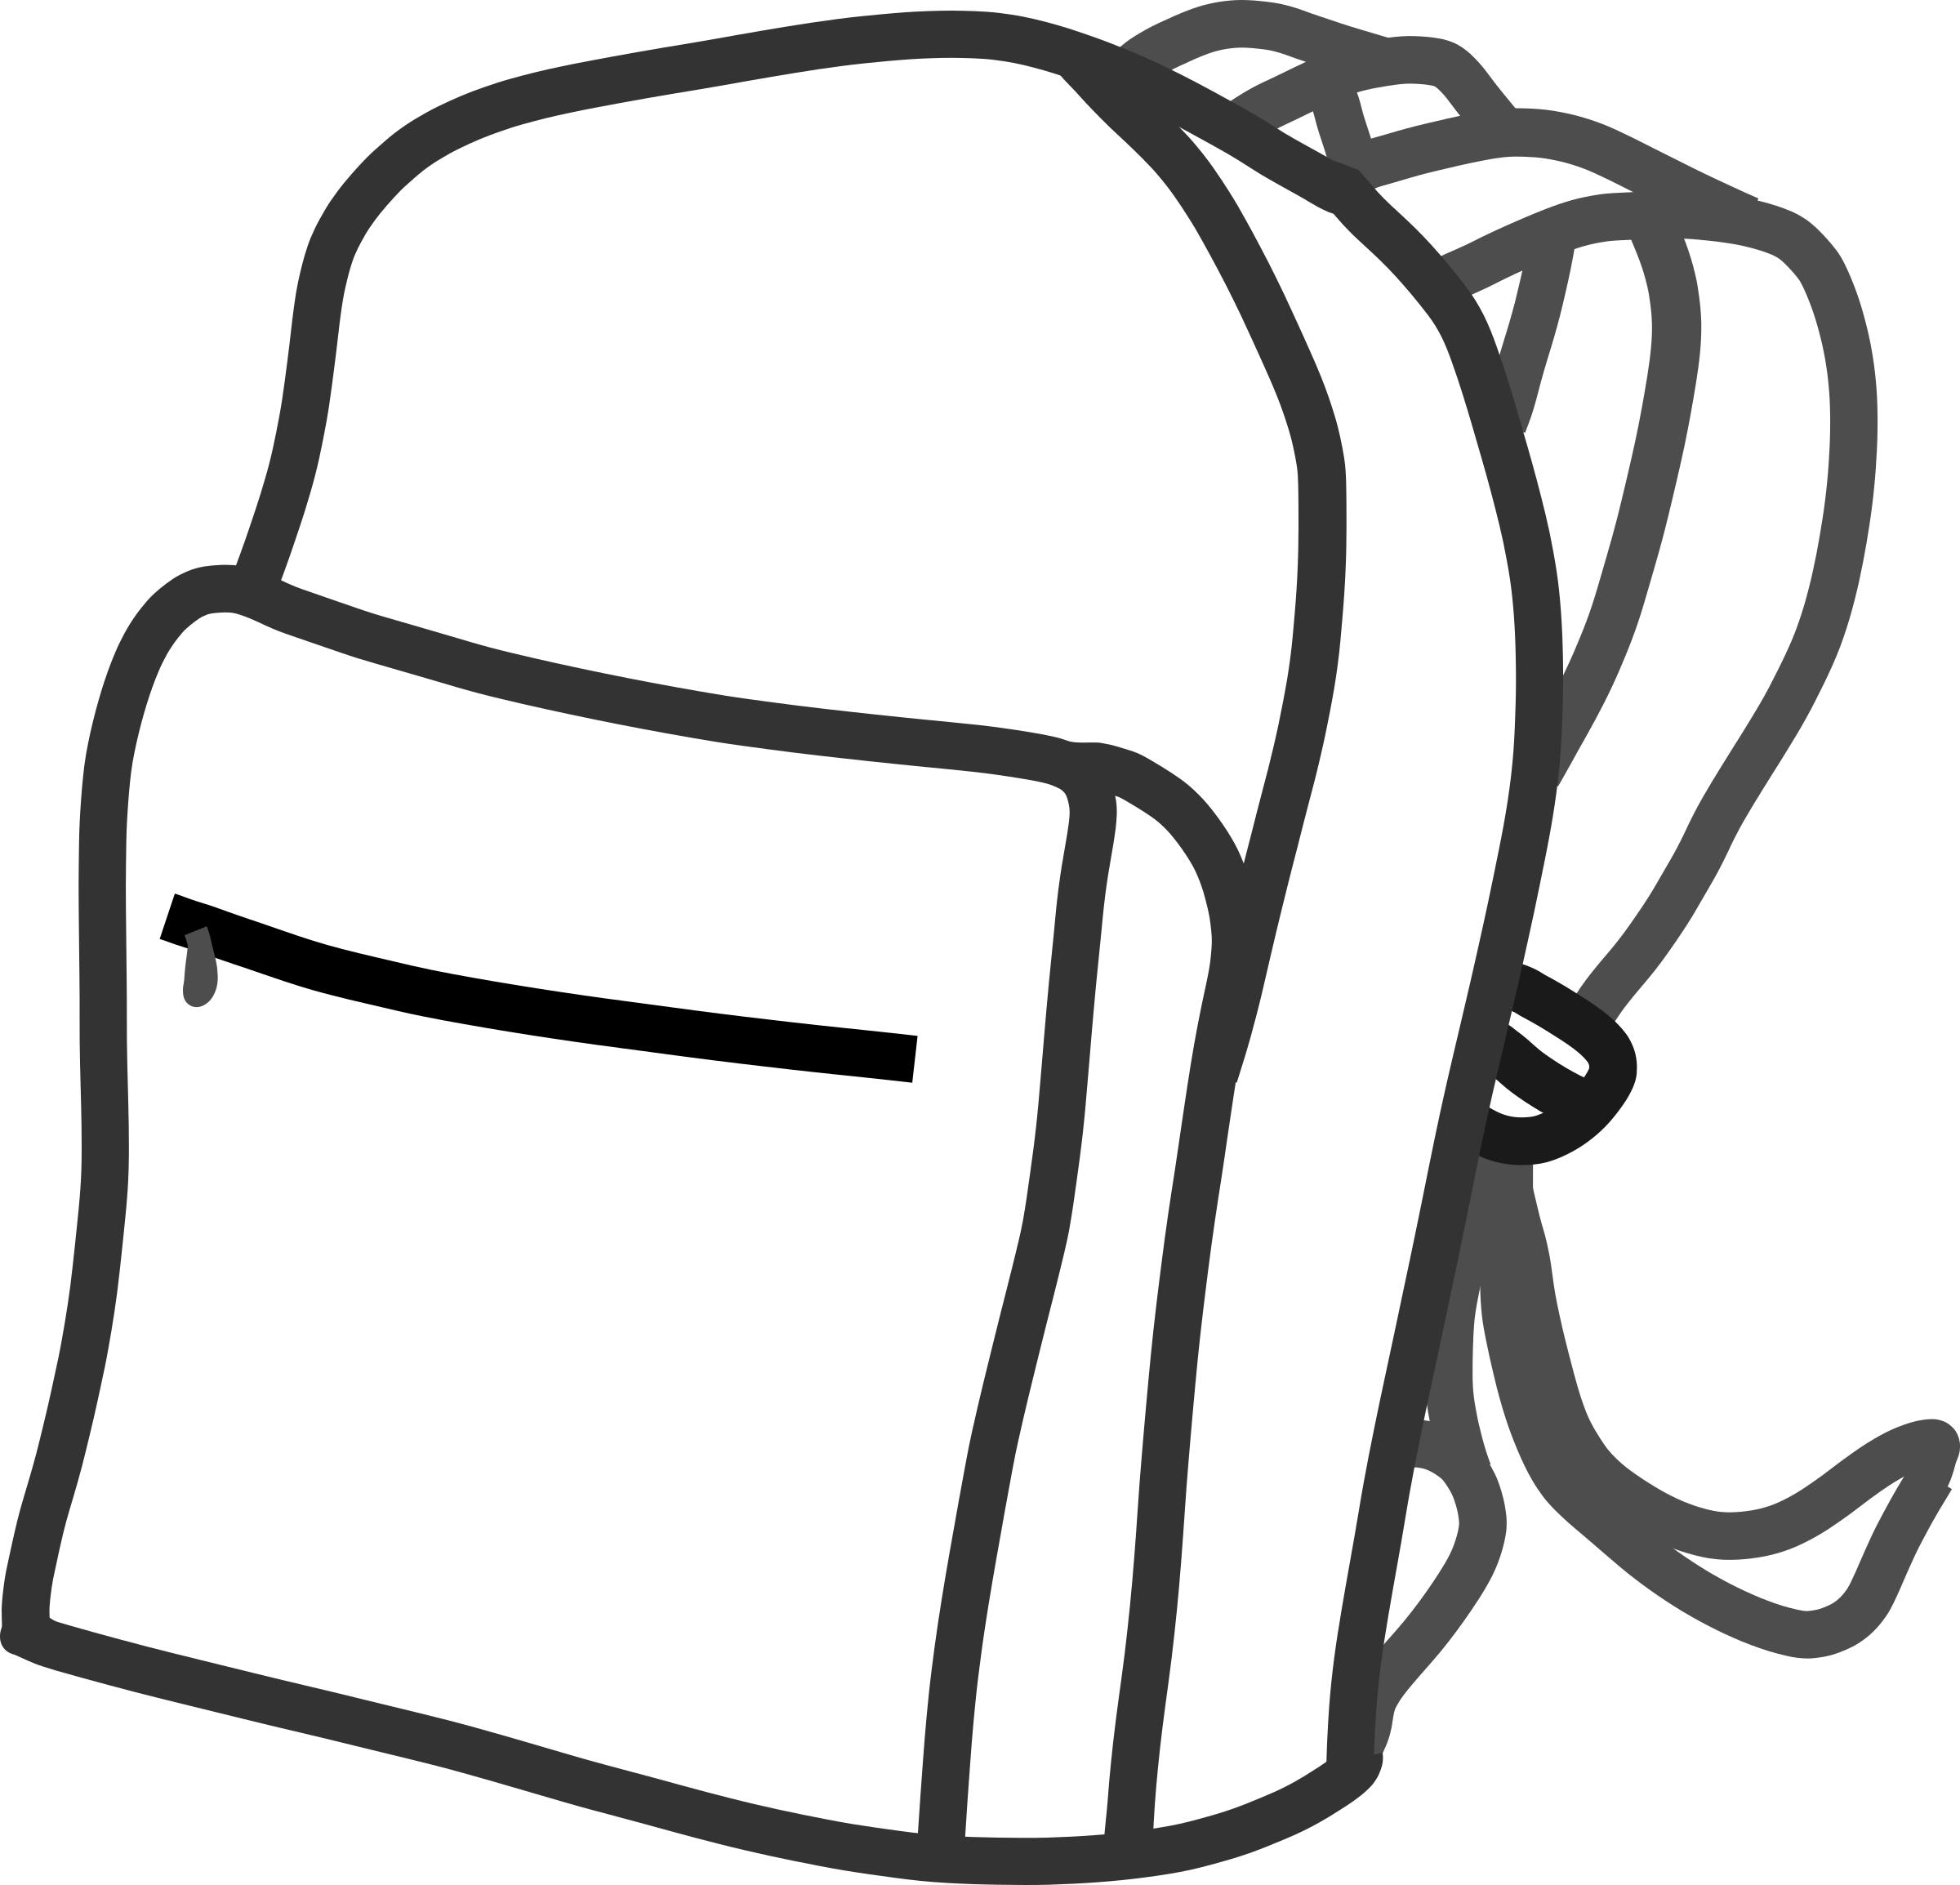 Red backpack PNG image transparent image download, size: 1024x1024px